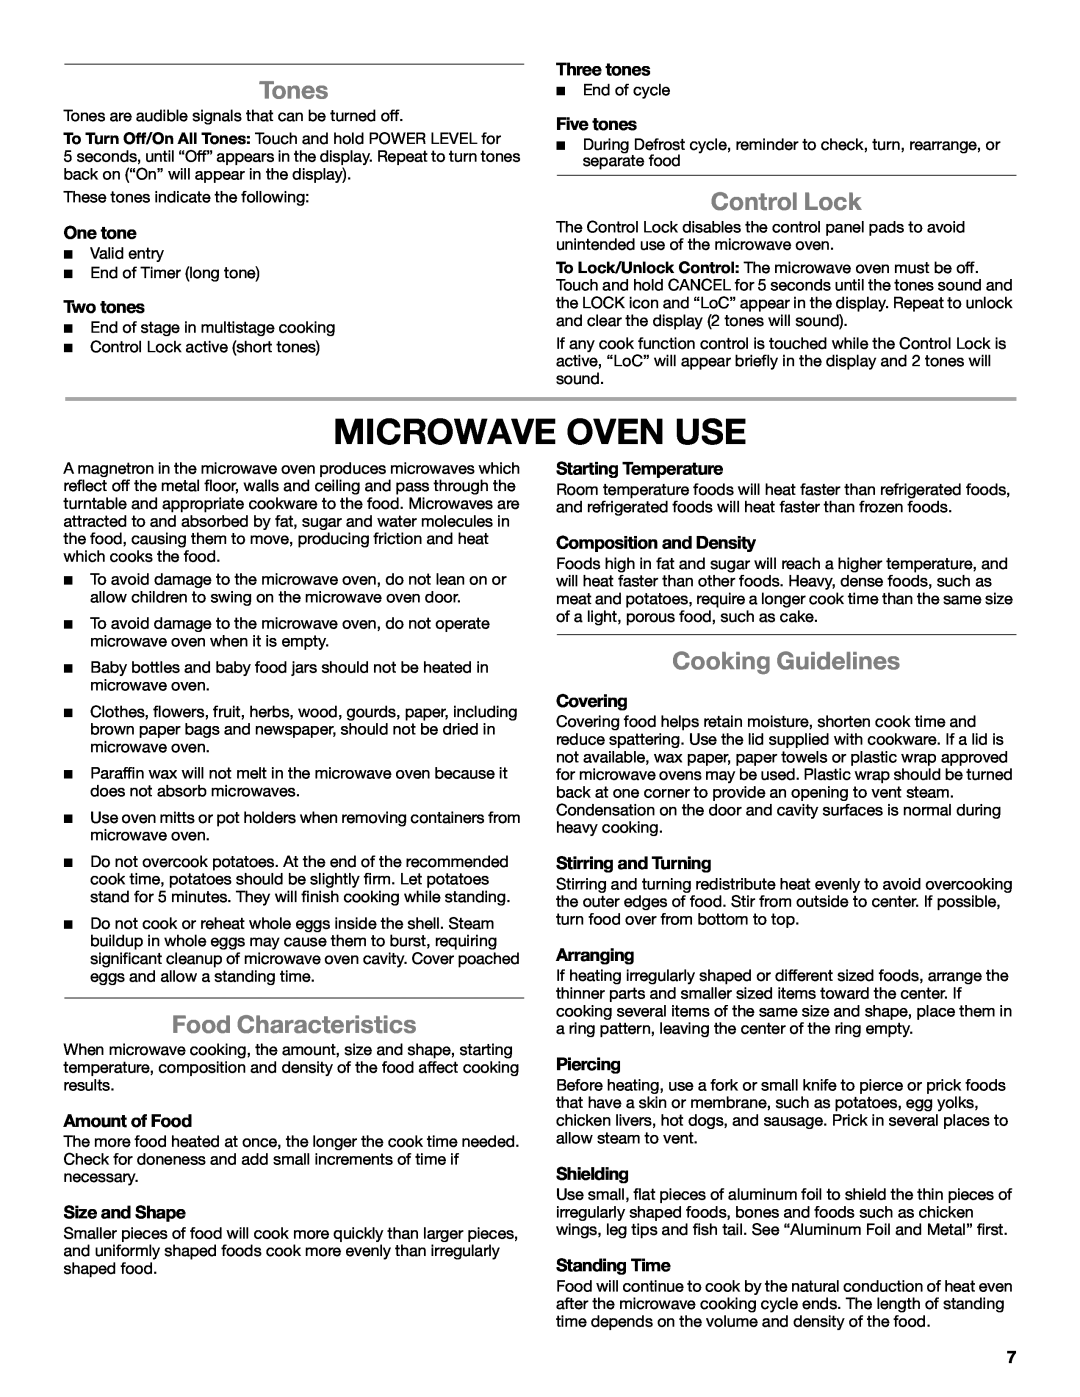 Whirlpool WMC10007 manual Microwave Oven Use, Tones, Control Lock, Food Characteristics, Cooking Guidelines 